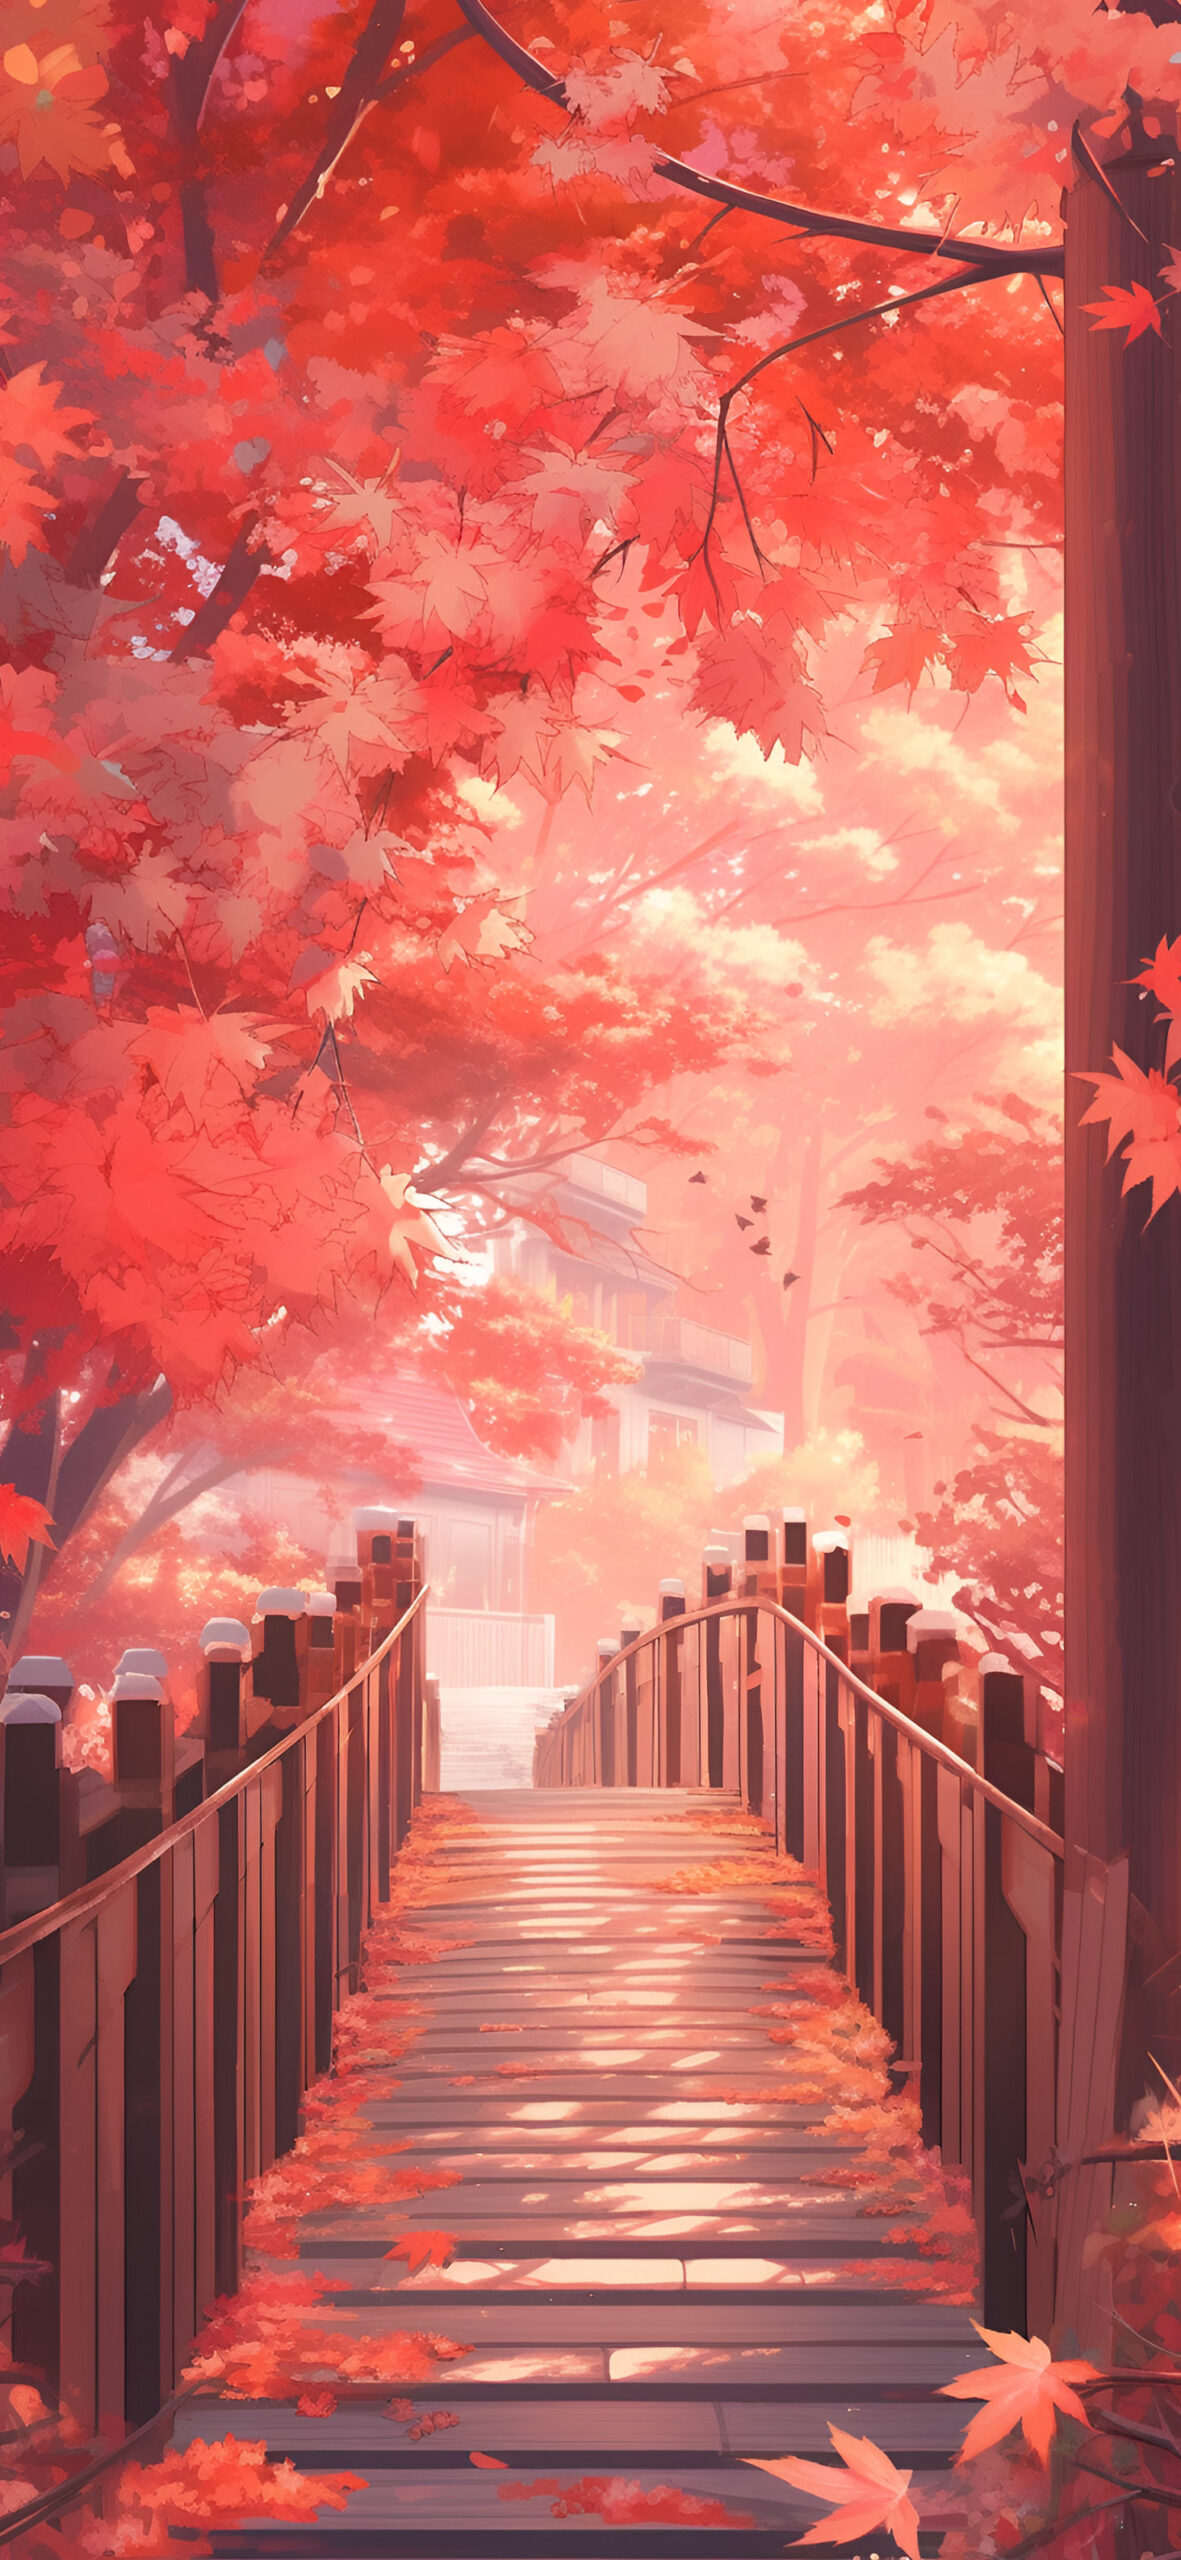 Autumn bridge with red maple leaves wallpaper Aesthetic fall w